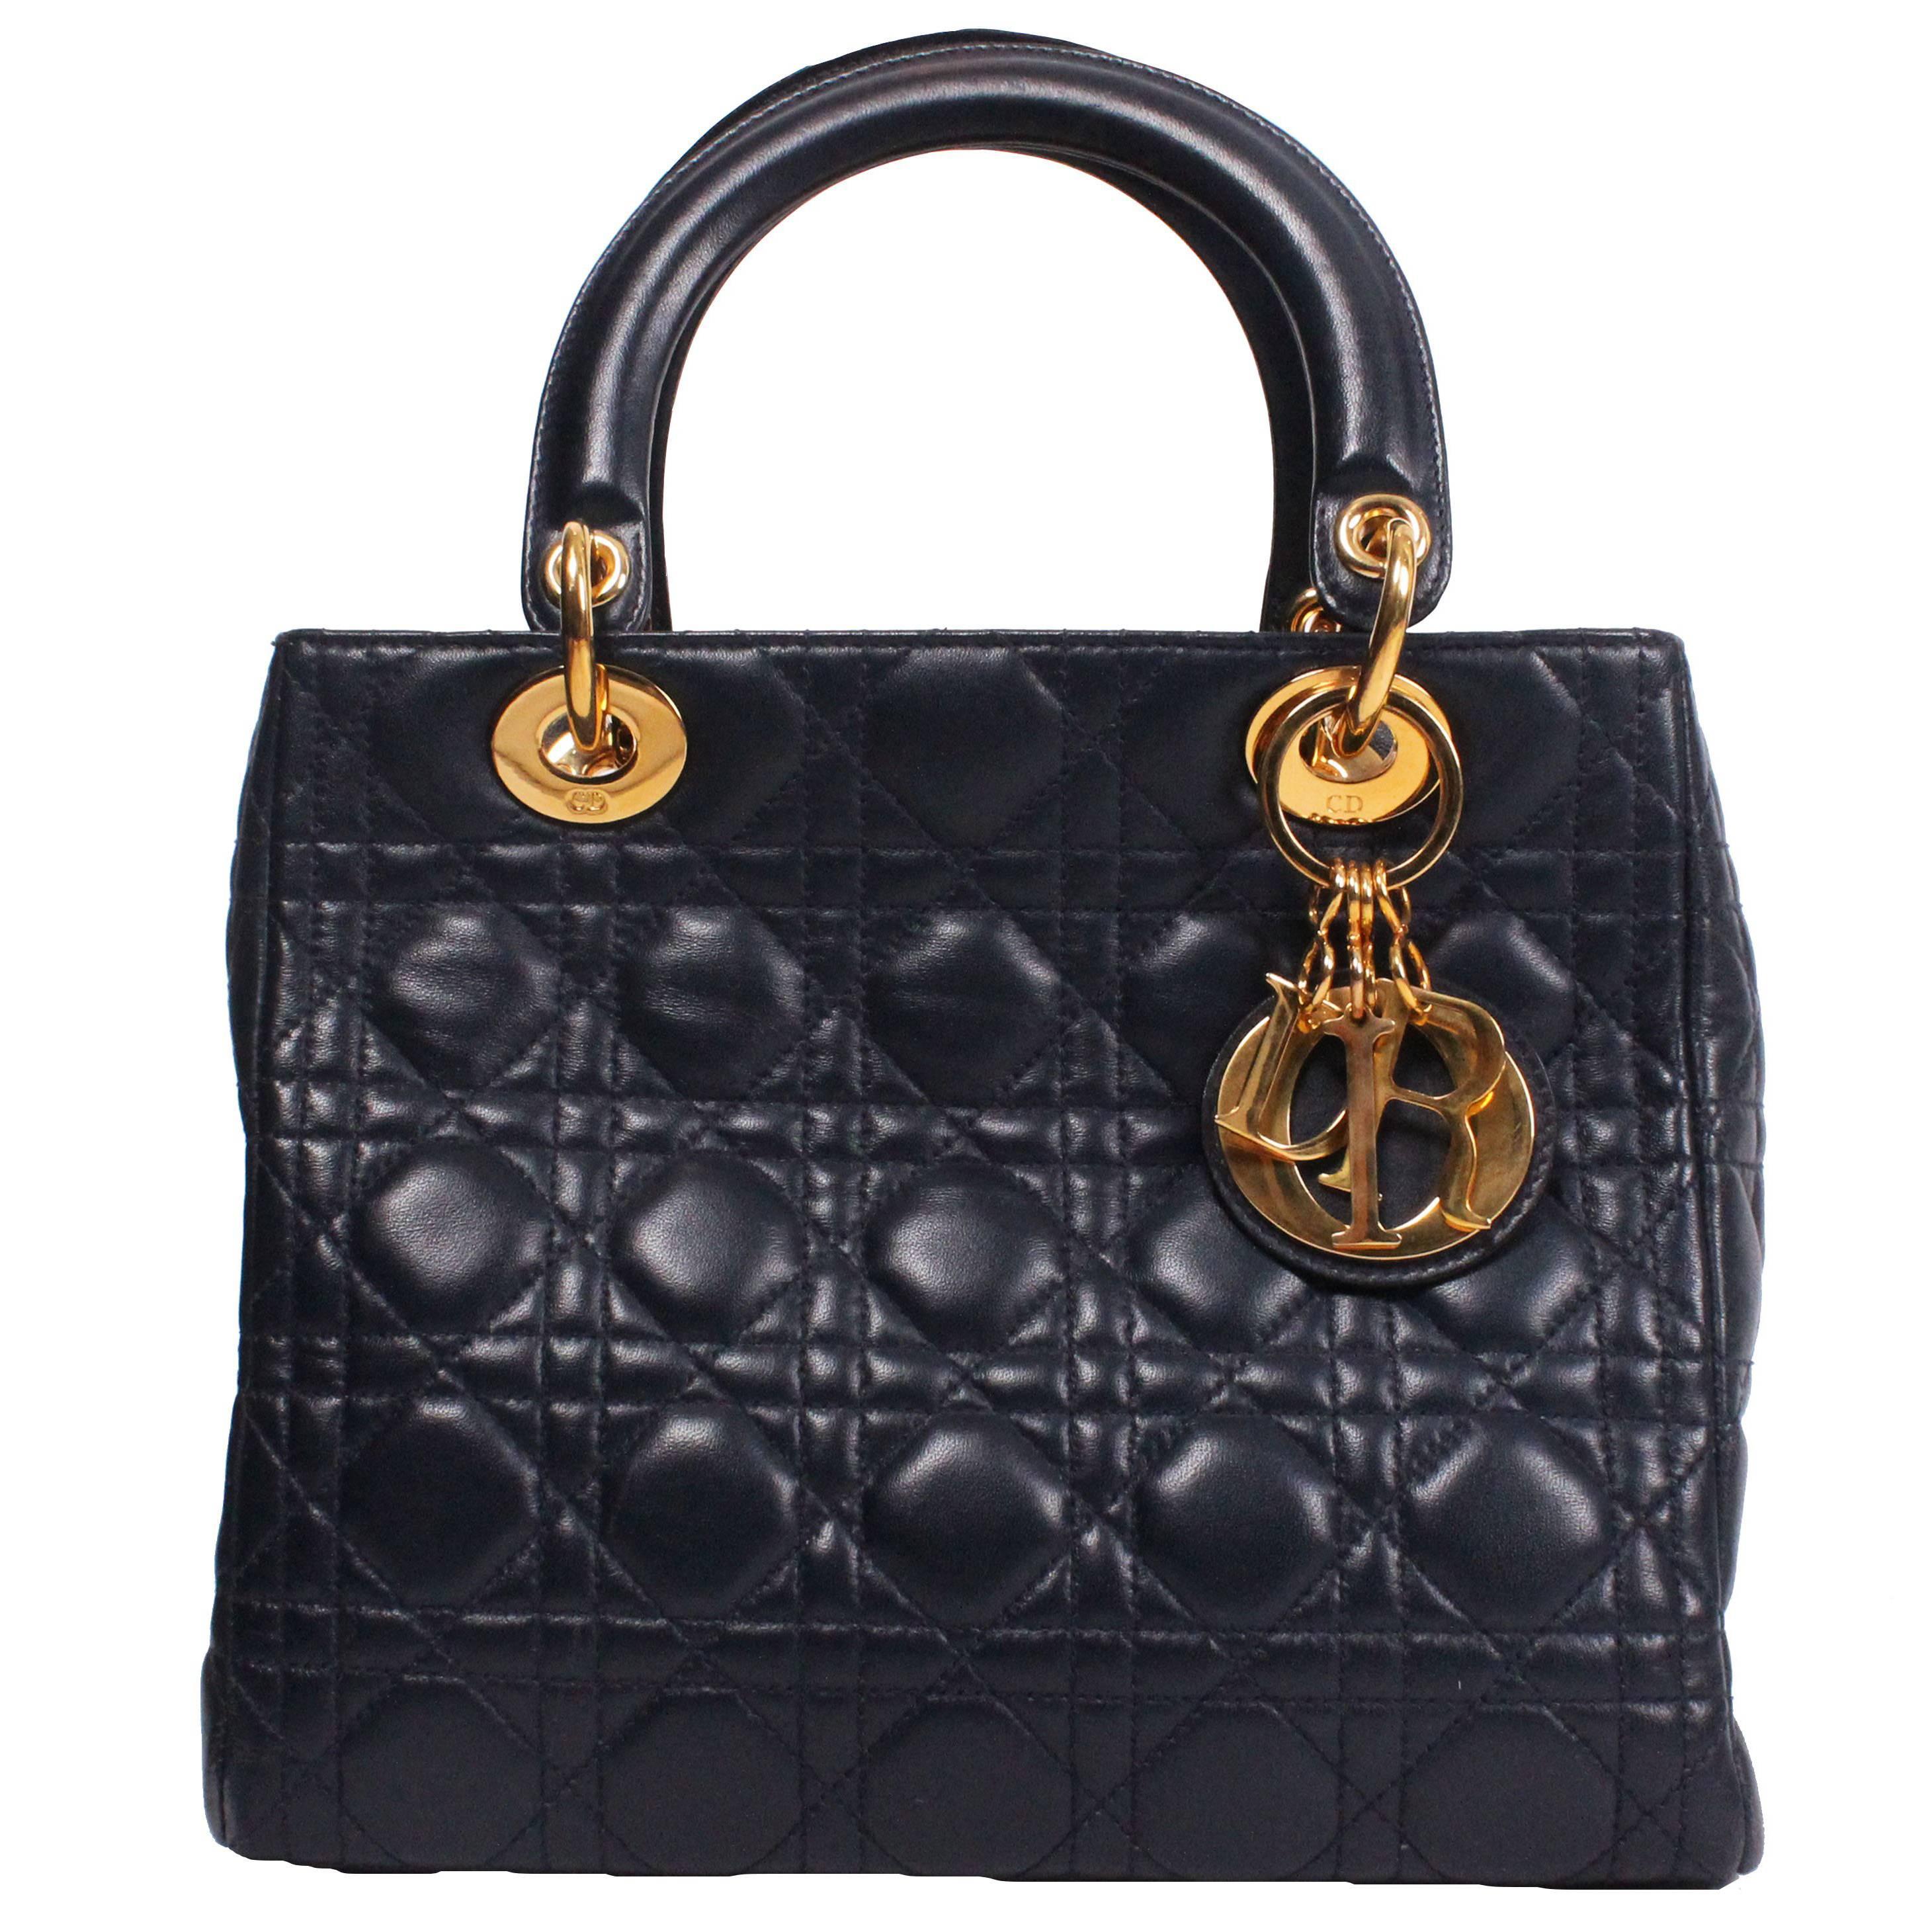 Christian Dior D bag in Navy leather.